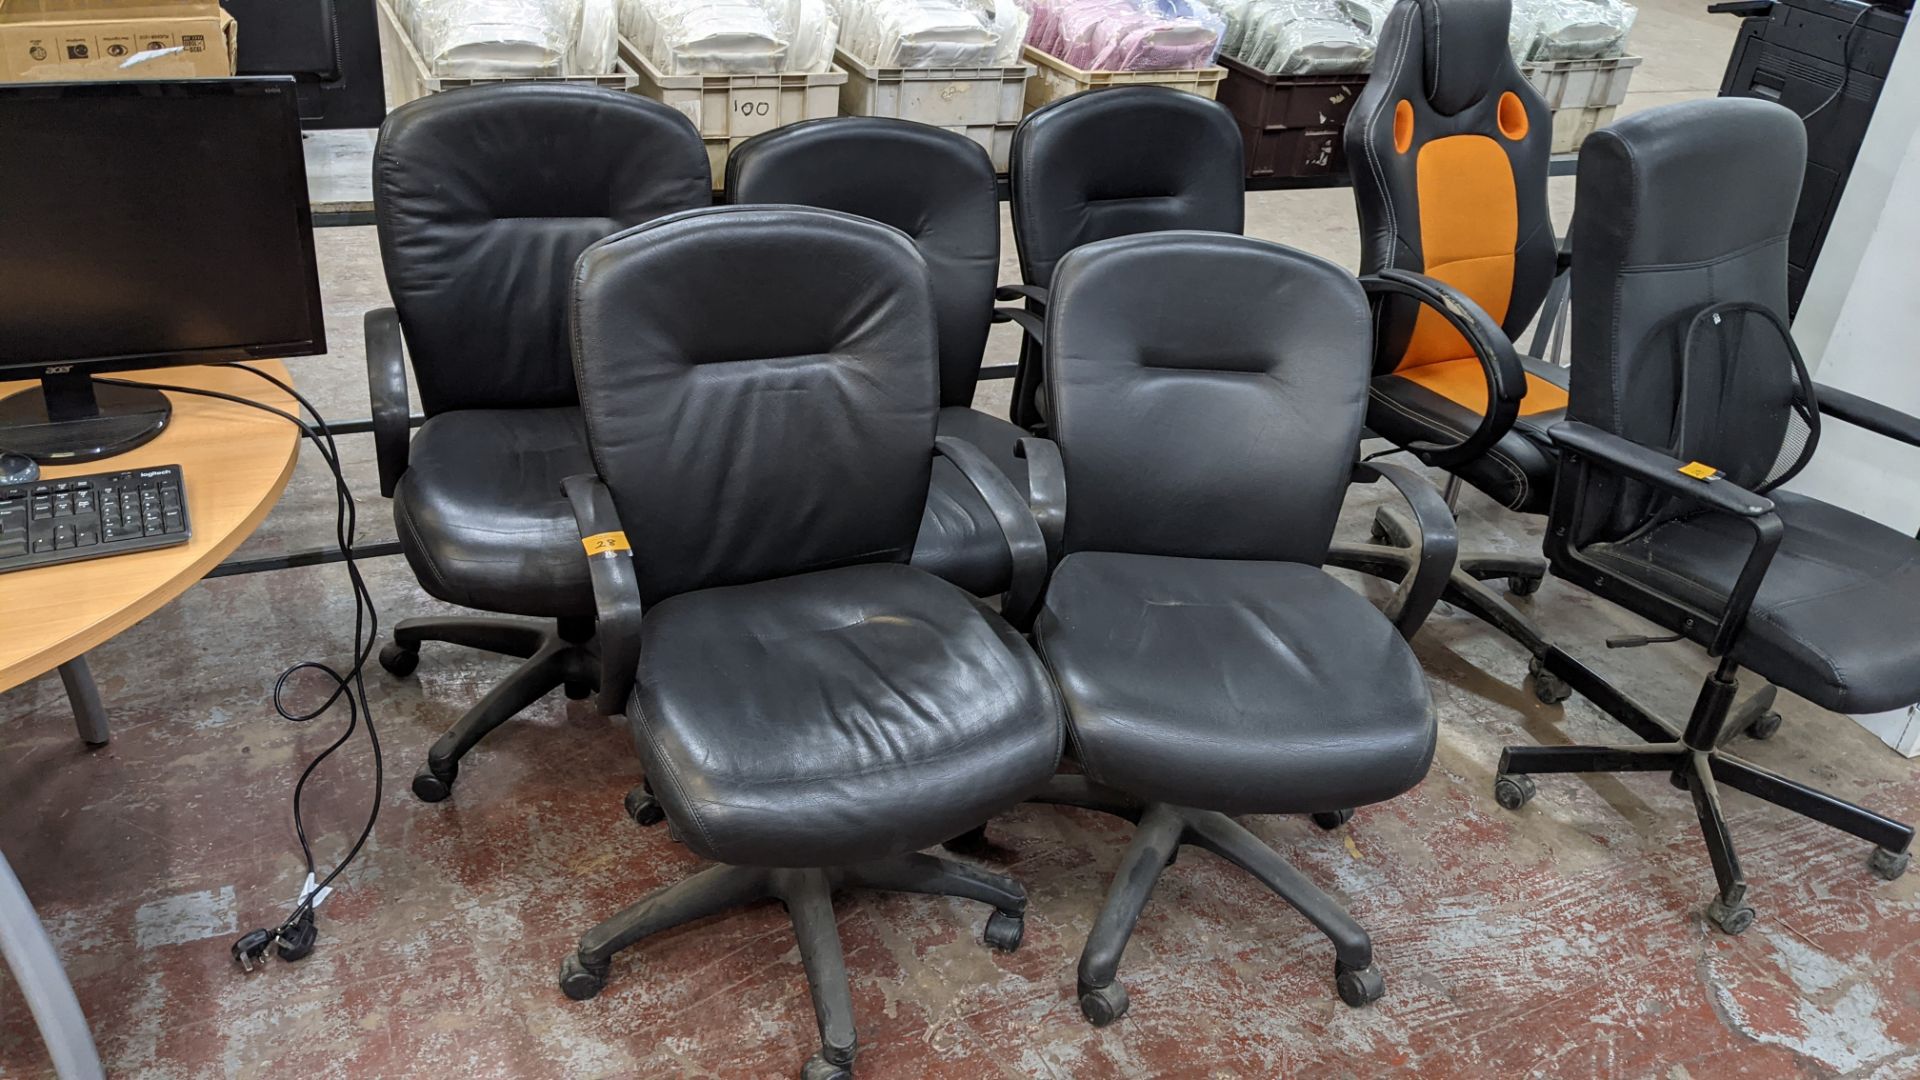 5 off matching leather exec chairs with arms - Image 2 of 6